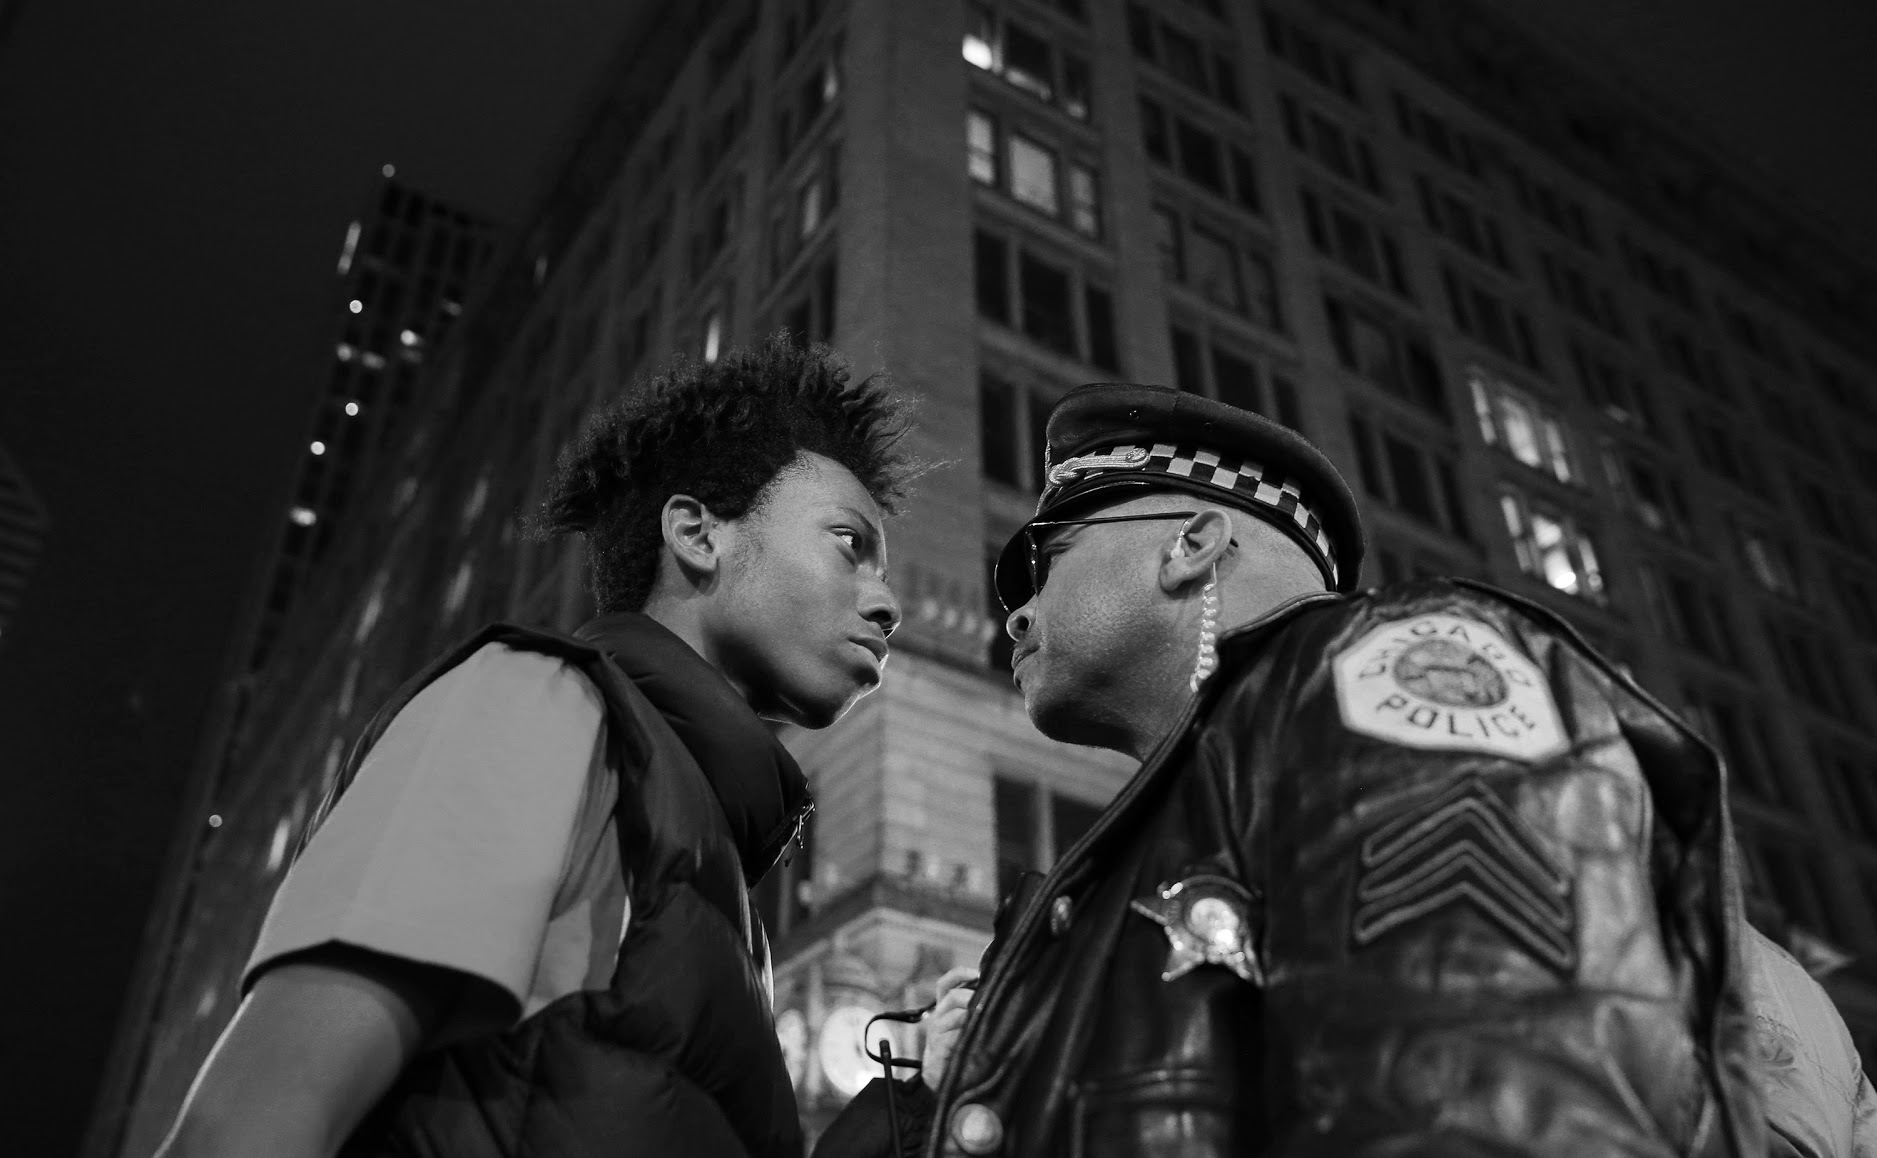 Lamon Reccord, left, scolds a police sergeant during a police violence protest and march at State and Randolph streets Wednesday, Nov. 25, 2015, in Chicago.(John J. Kim/Chicago Tribune)